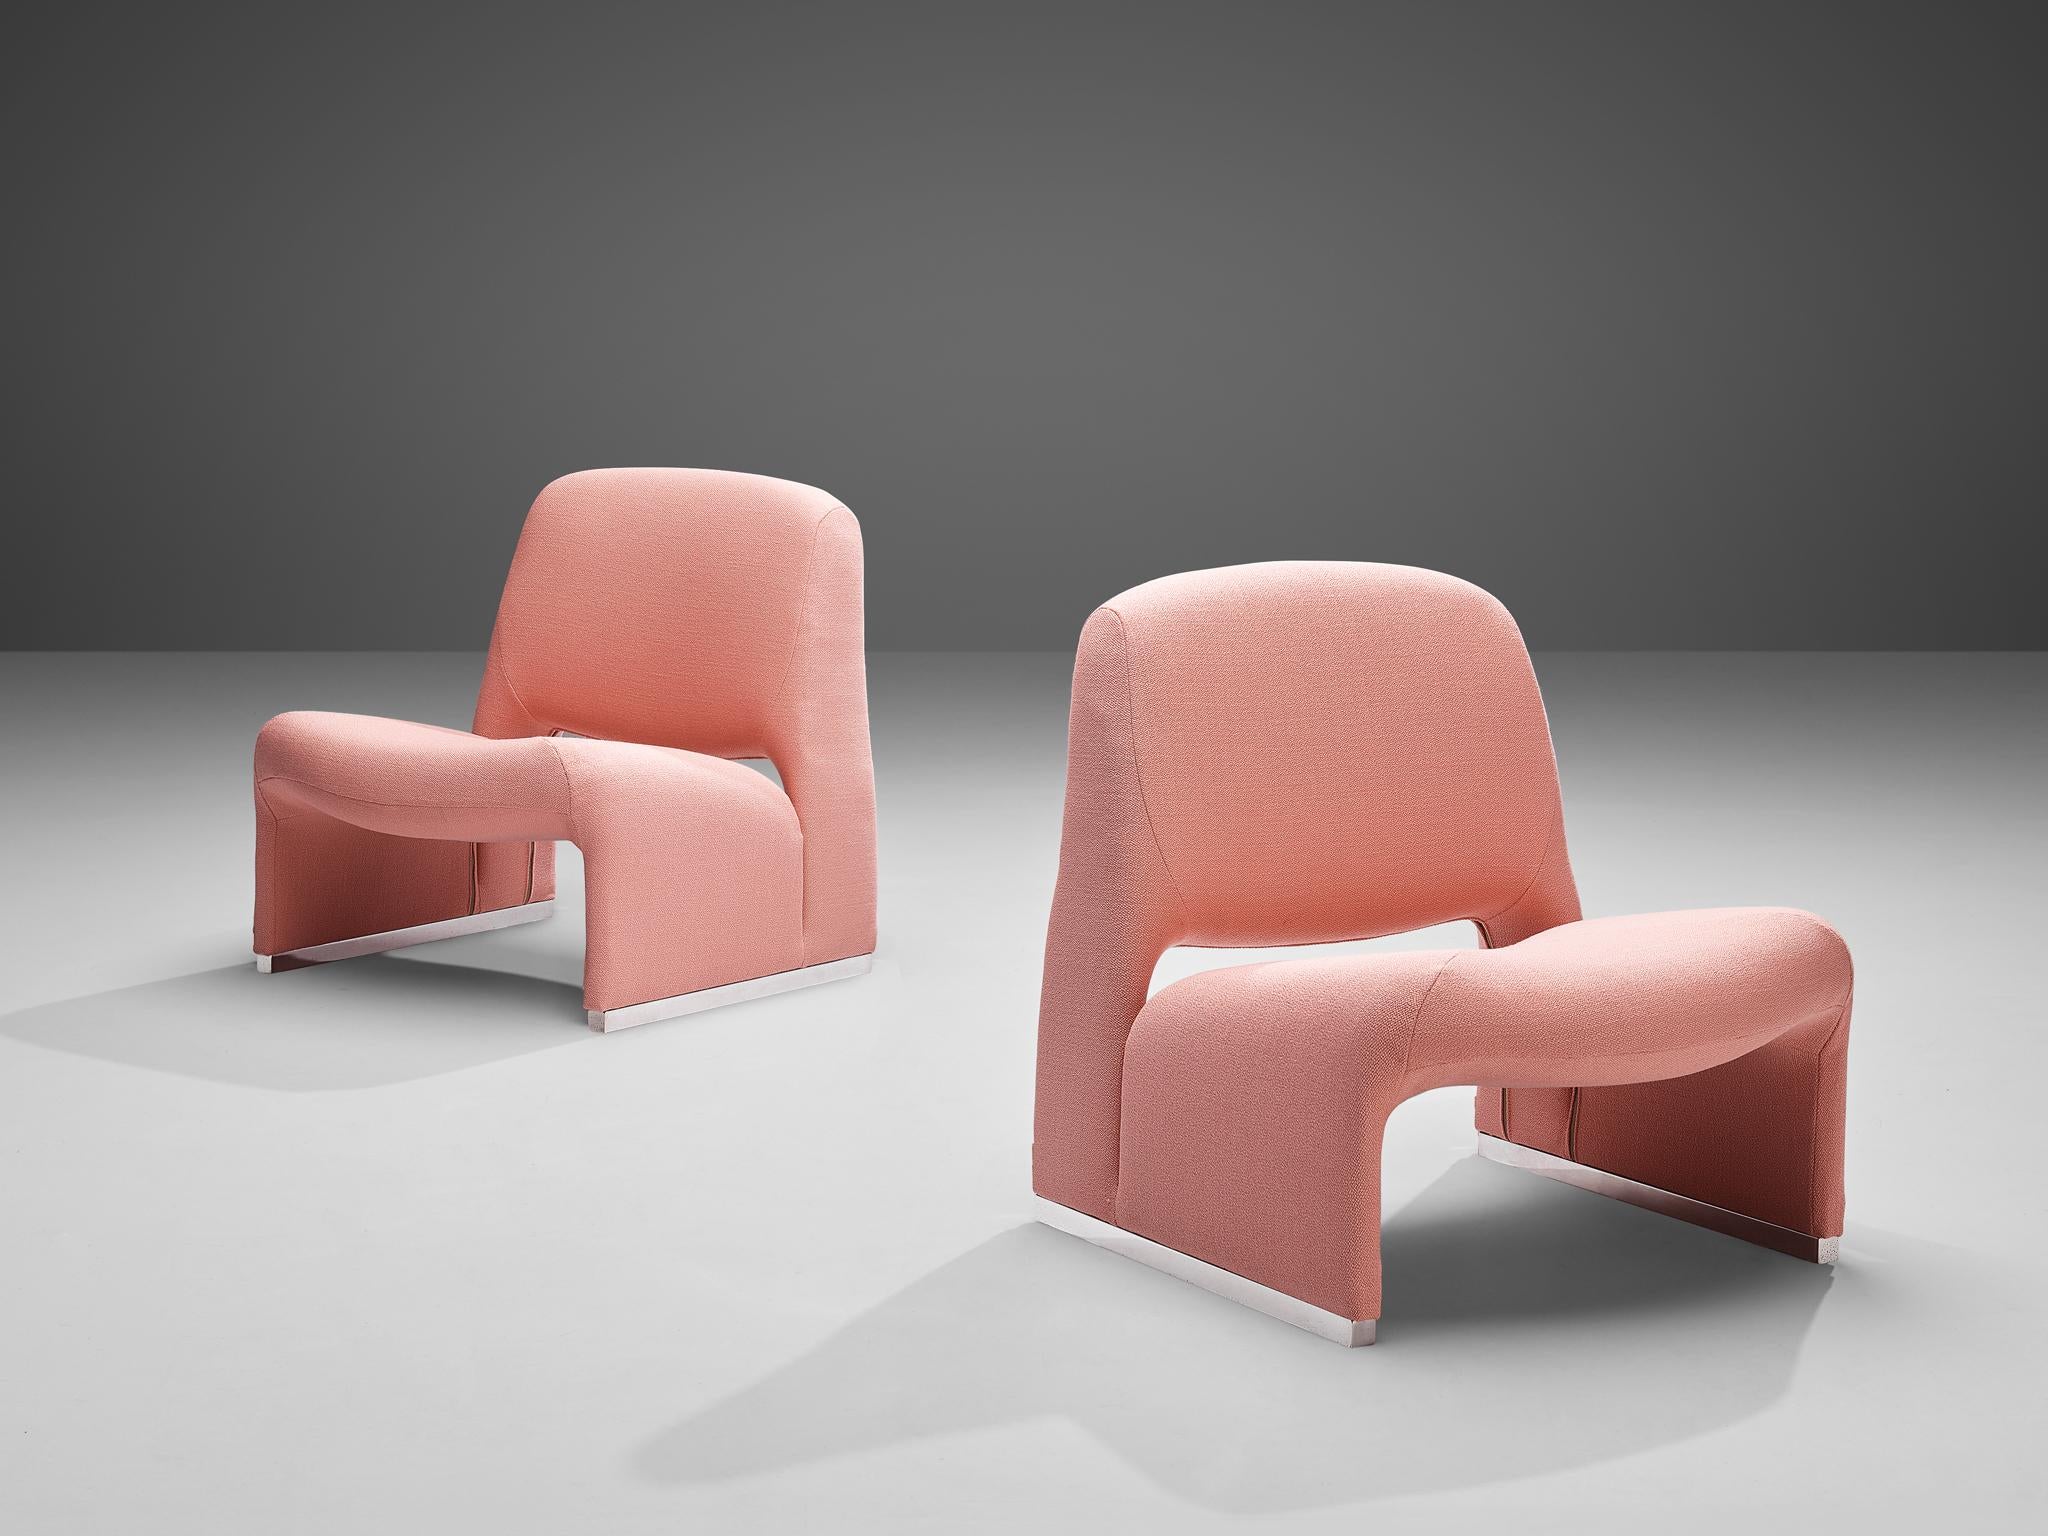 Lounge chairs, light pink fabric, aluminum, Italy, 1970s

These lounge chairs strongly remind of Giancarlo Piretti’s ‘Alky’ lounge chair (1969), yet they feature characteristic differences. Whereas the ‘Alky’ lounge chair consists of one shell,